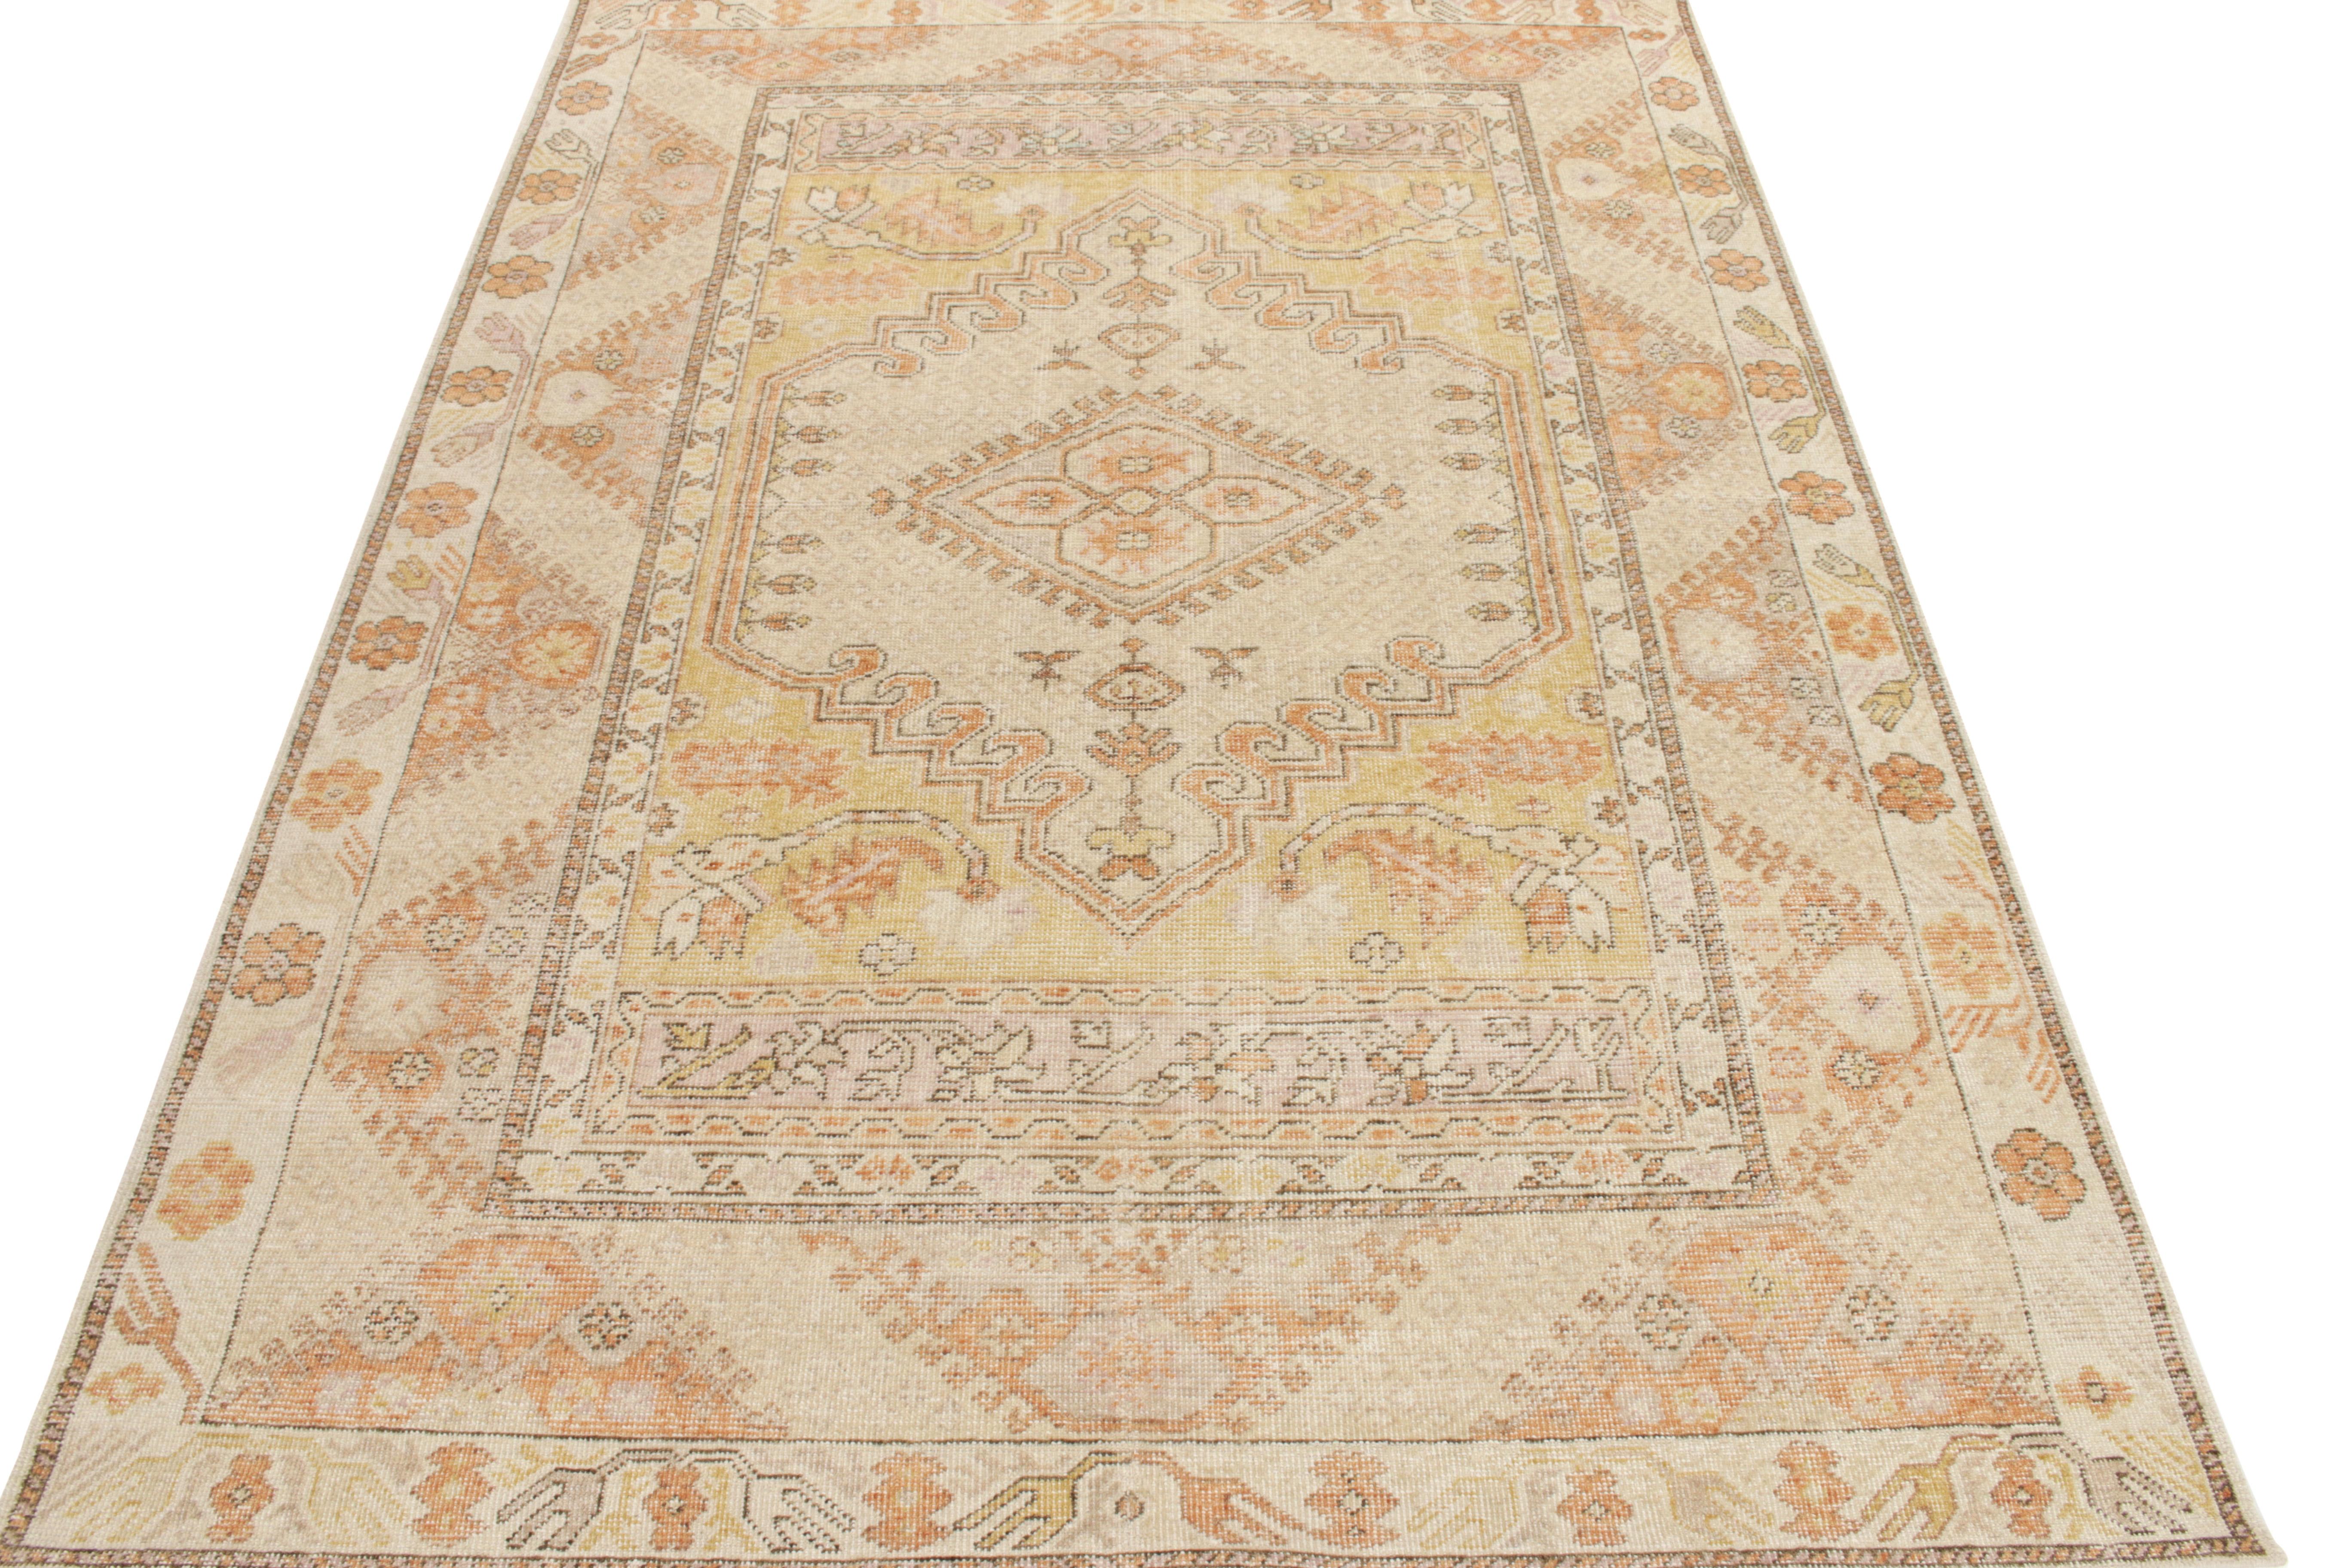 An elegant distressed style rug from Rug & Kilim’s Homage Collection. Hand-knotted in wool, this 6x9 piece features a montage of geometric & floral patterns in nomadic sensibilities accompanying medallions in cream, canary yellow & tangerine